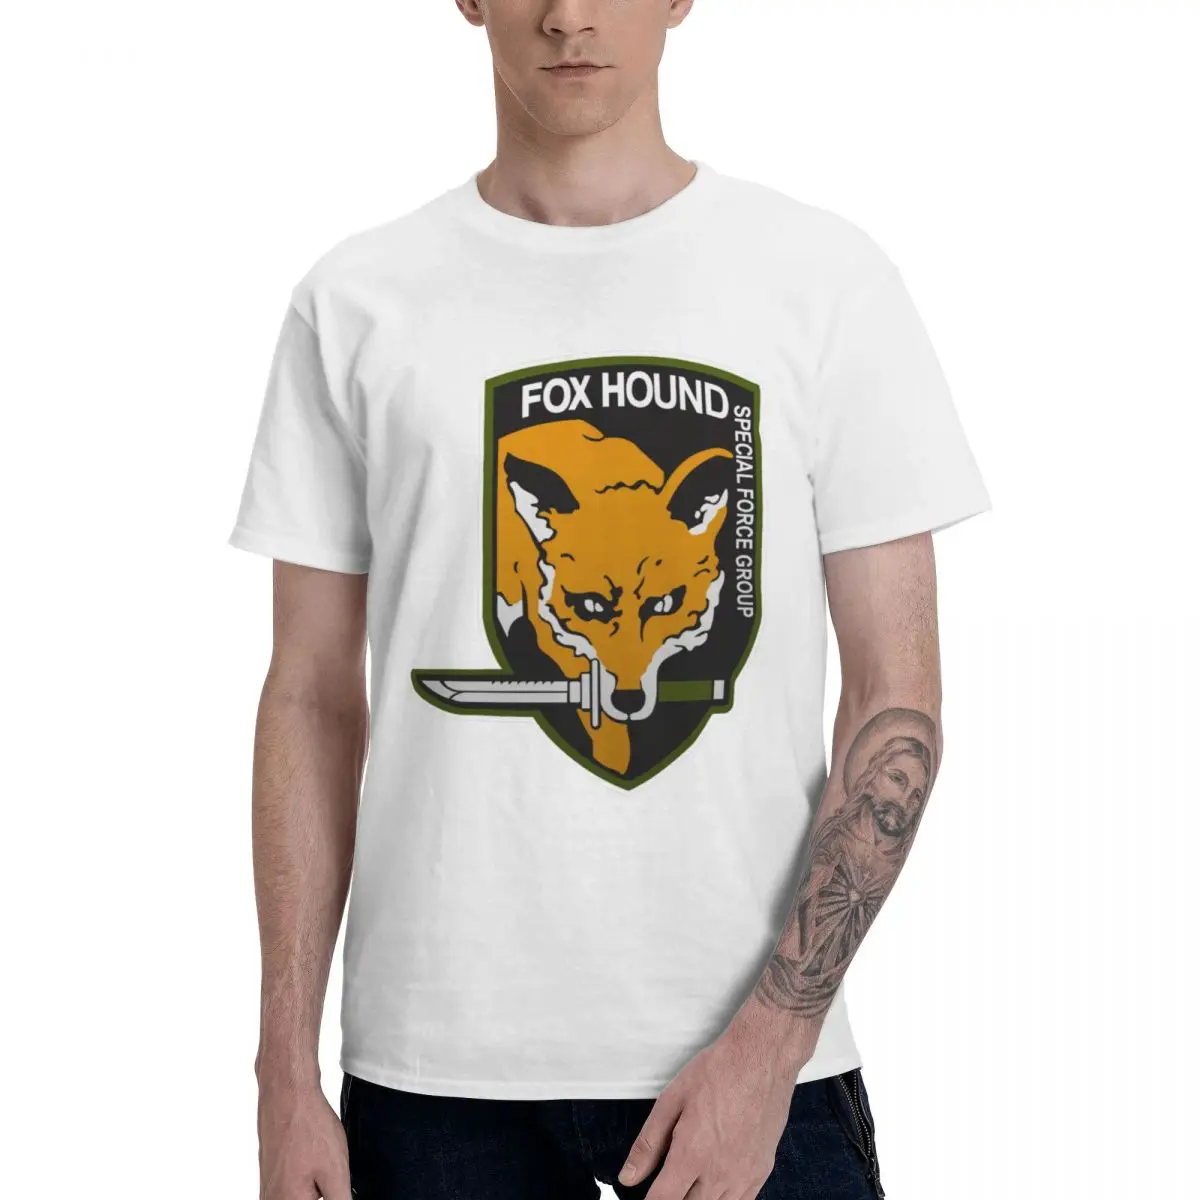 

Fox Hound Special Force Group T Shirts Pure Cotton Round Neck Men T Shirt Short Sleeve Oversized Gift Tee Clothes